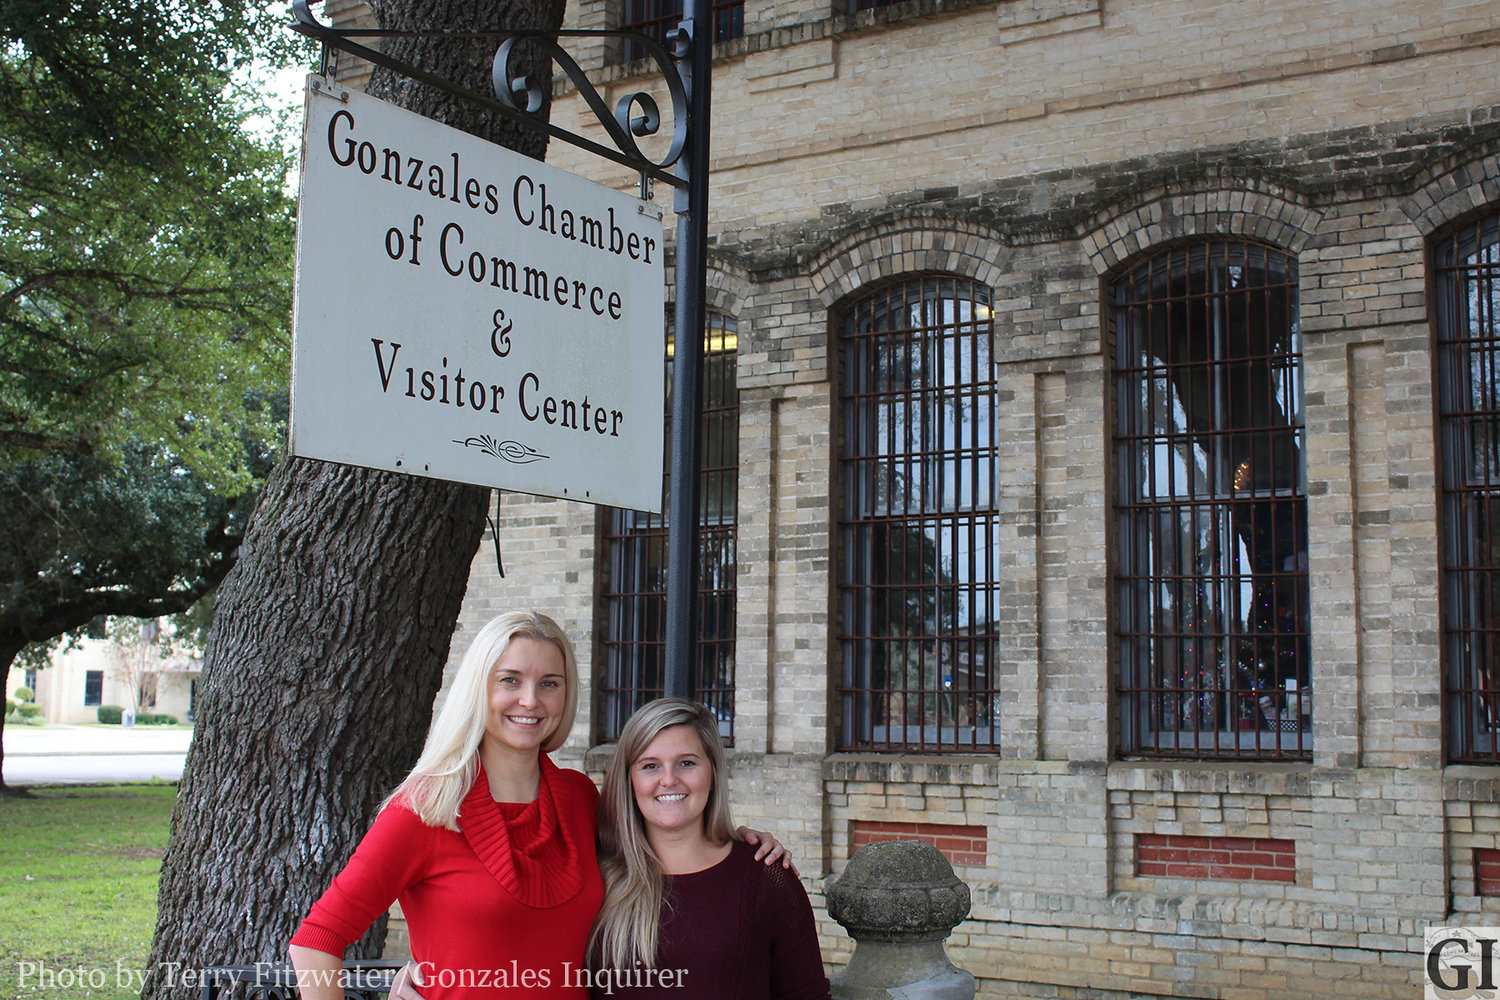 Daisy Scheske Freeman (left) and Liz Reiley-DuBose (right) are two pieces in a Gonzales Chamber of Commerce operation that helps promote, market and assist area business and community needs to our membership.